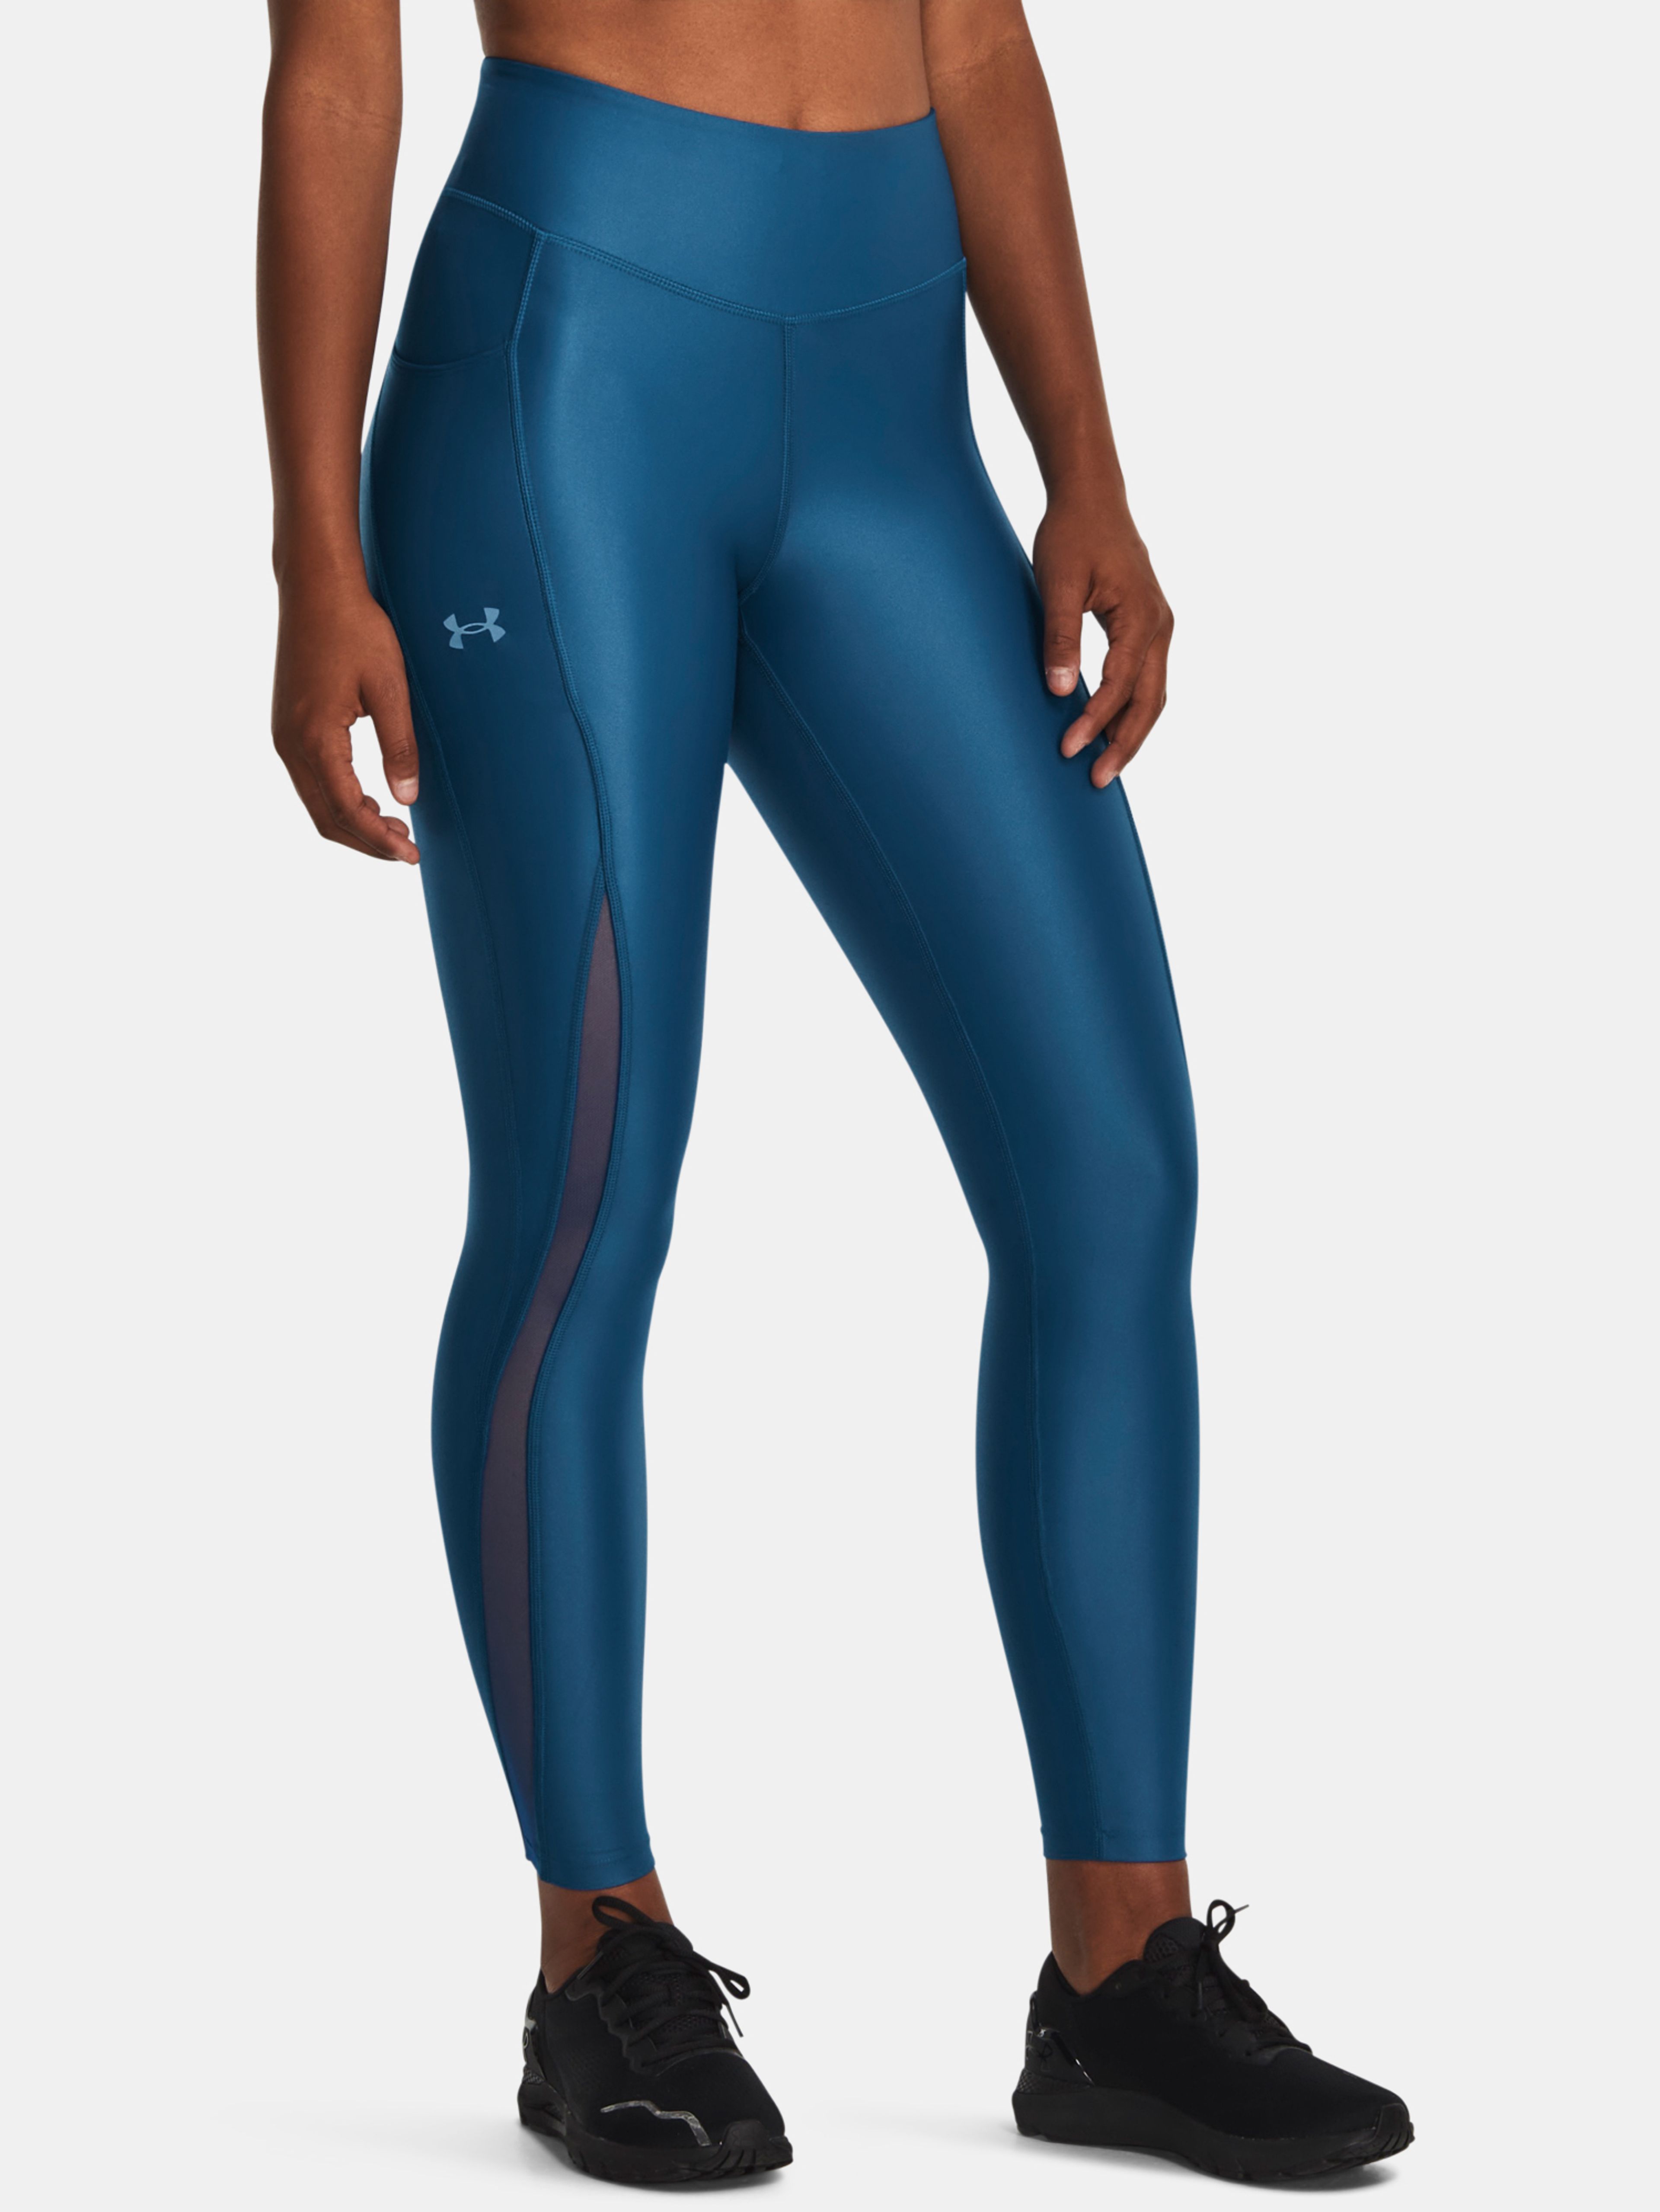 Under Armour Fly Fast Elite IsoChill Tgt-BLU leggings